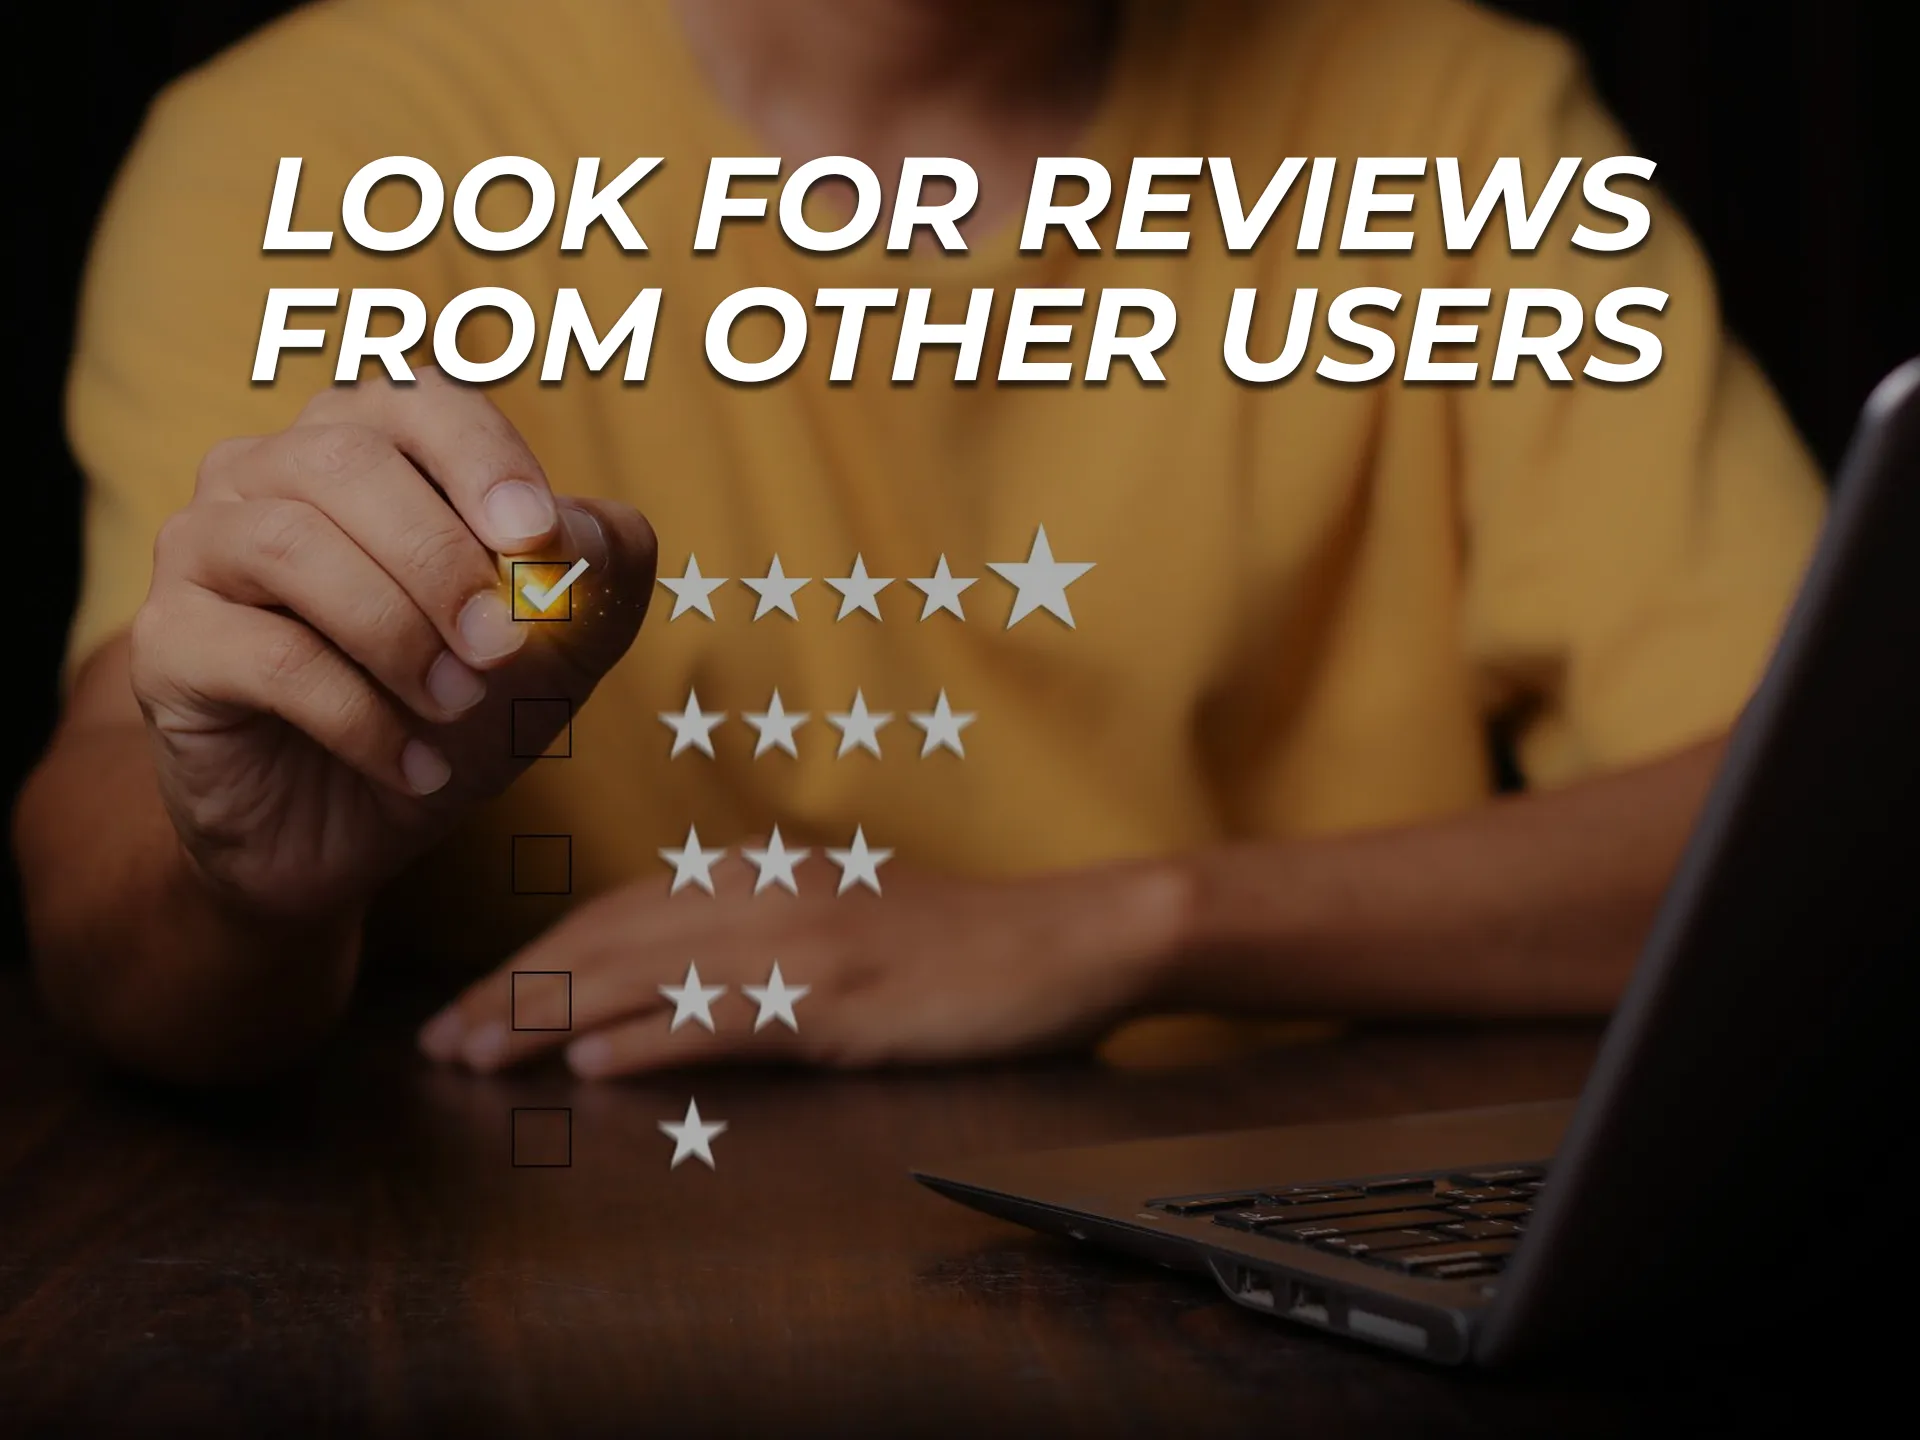 Read reviews from other users to rate new betting sites.